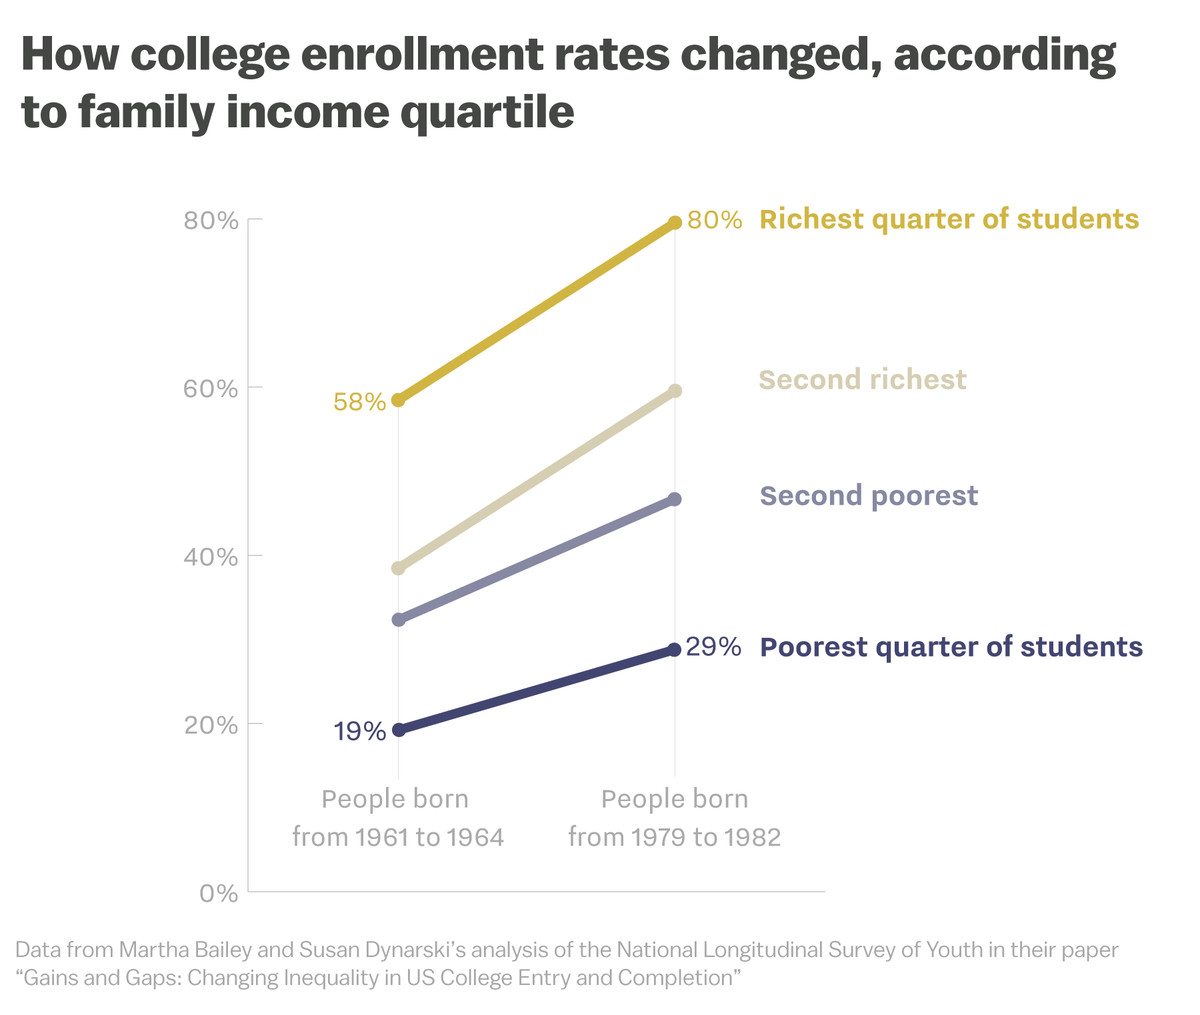 How college enrollment rates changed, according to family income quartile chart